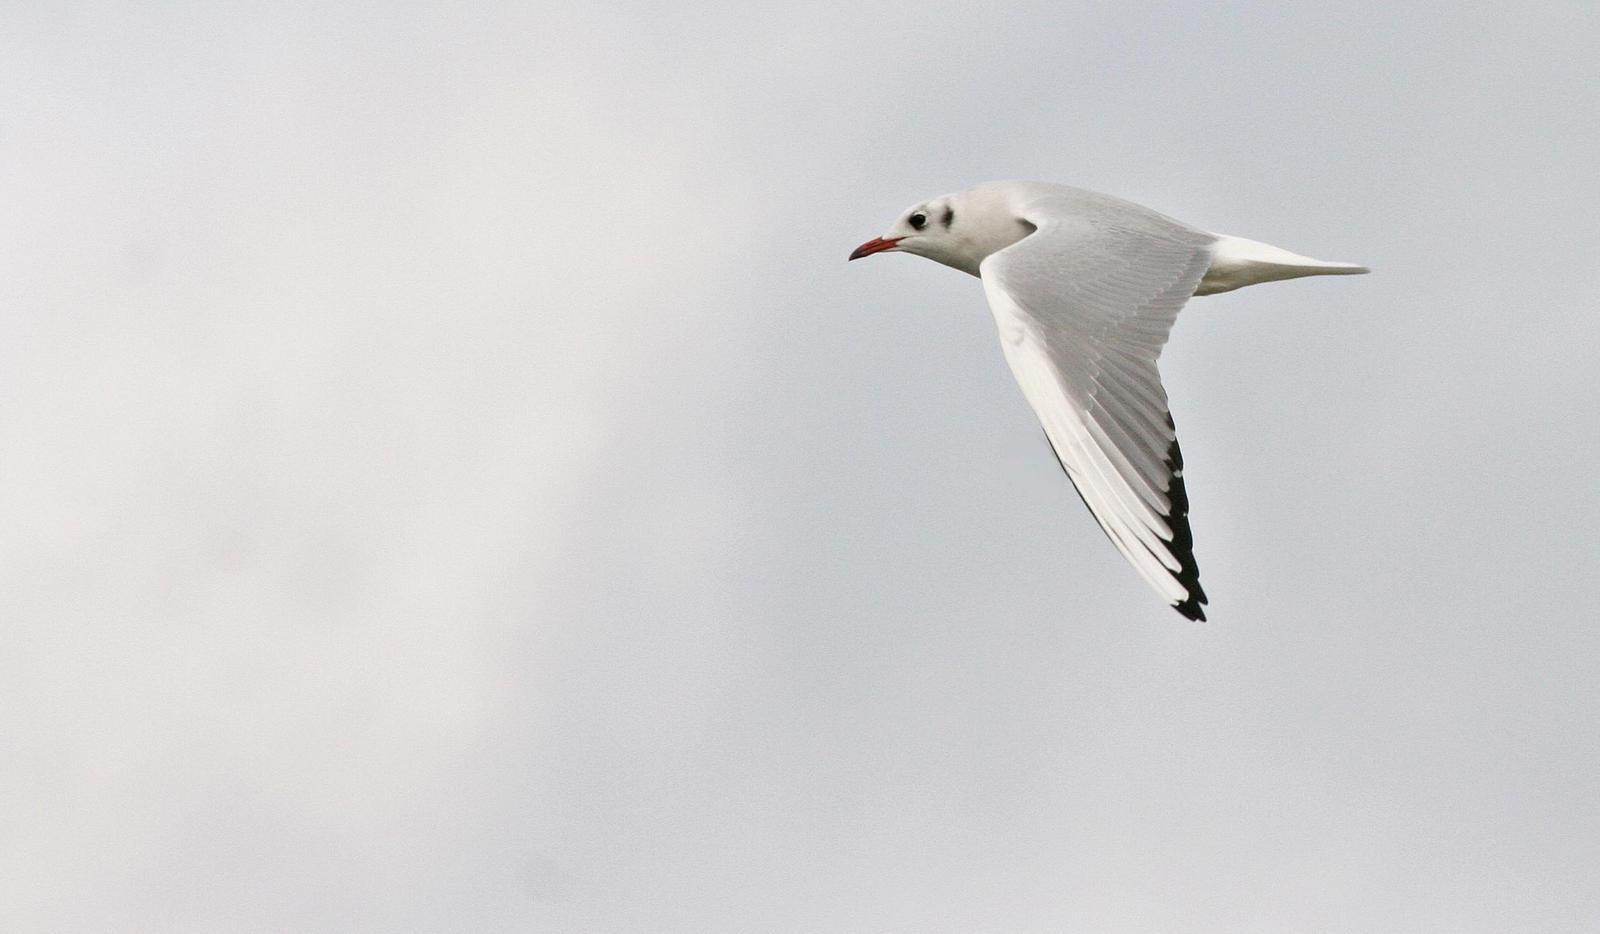 Black-headed Gull Photo by Andrew Theus